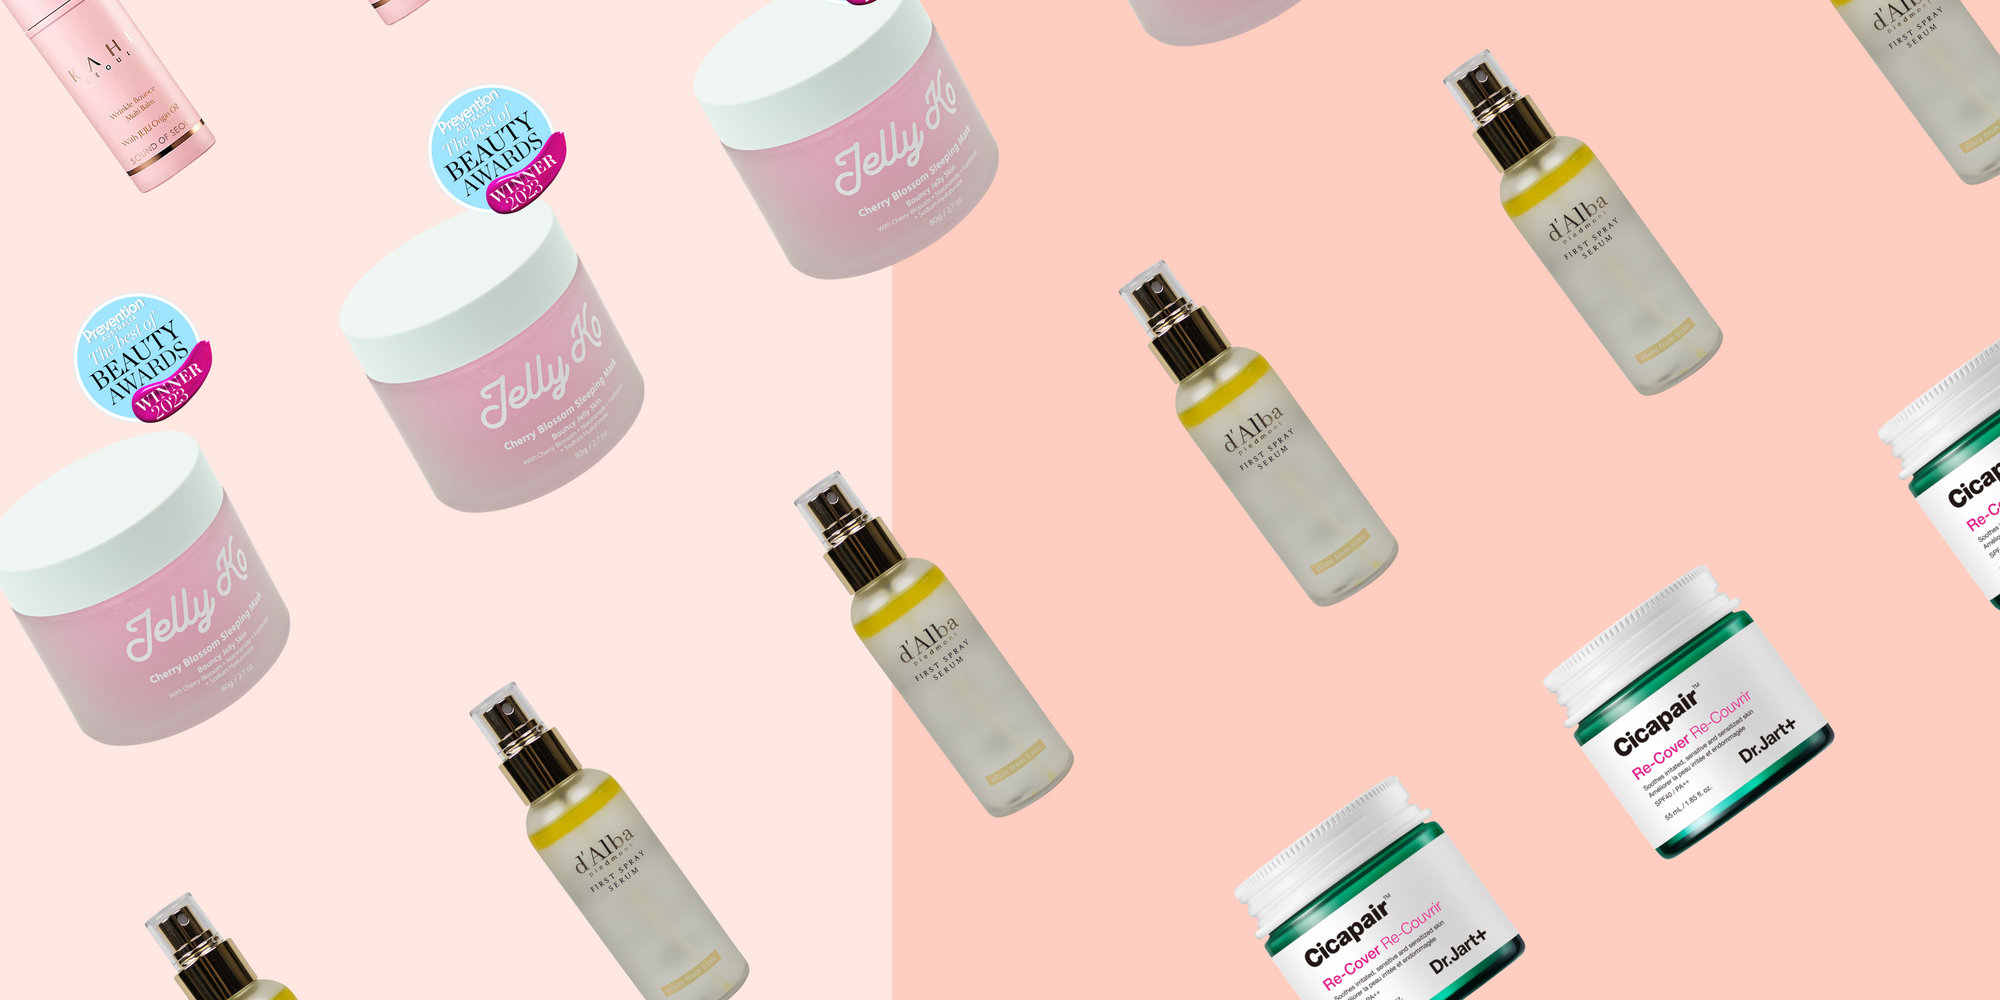 Korean Beauty Products to Level Up Your Skincare Routine